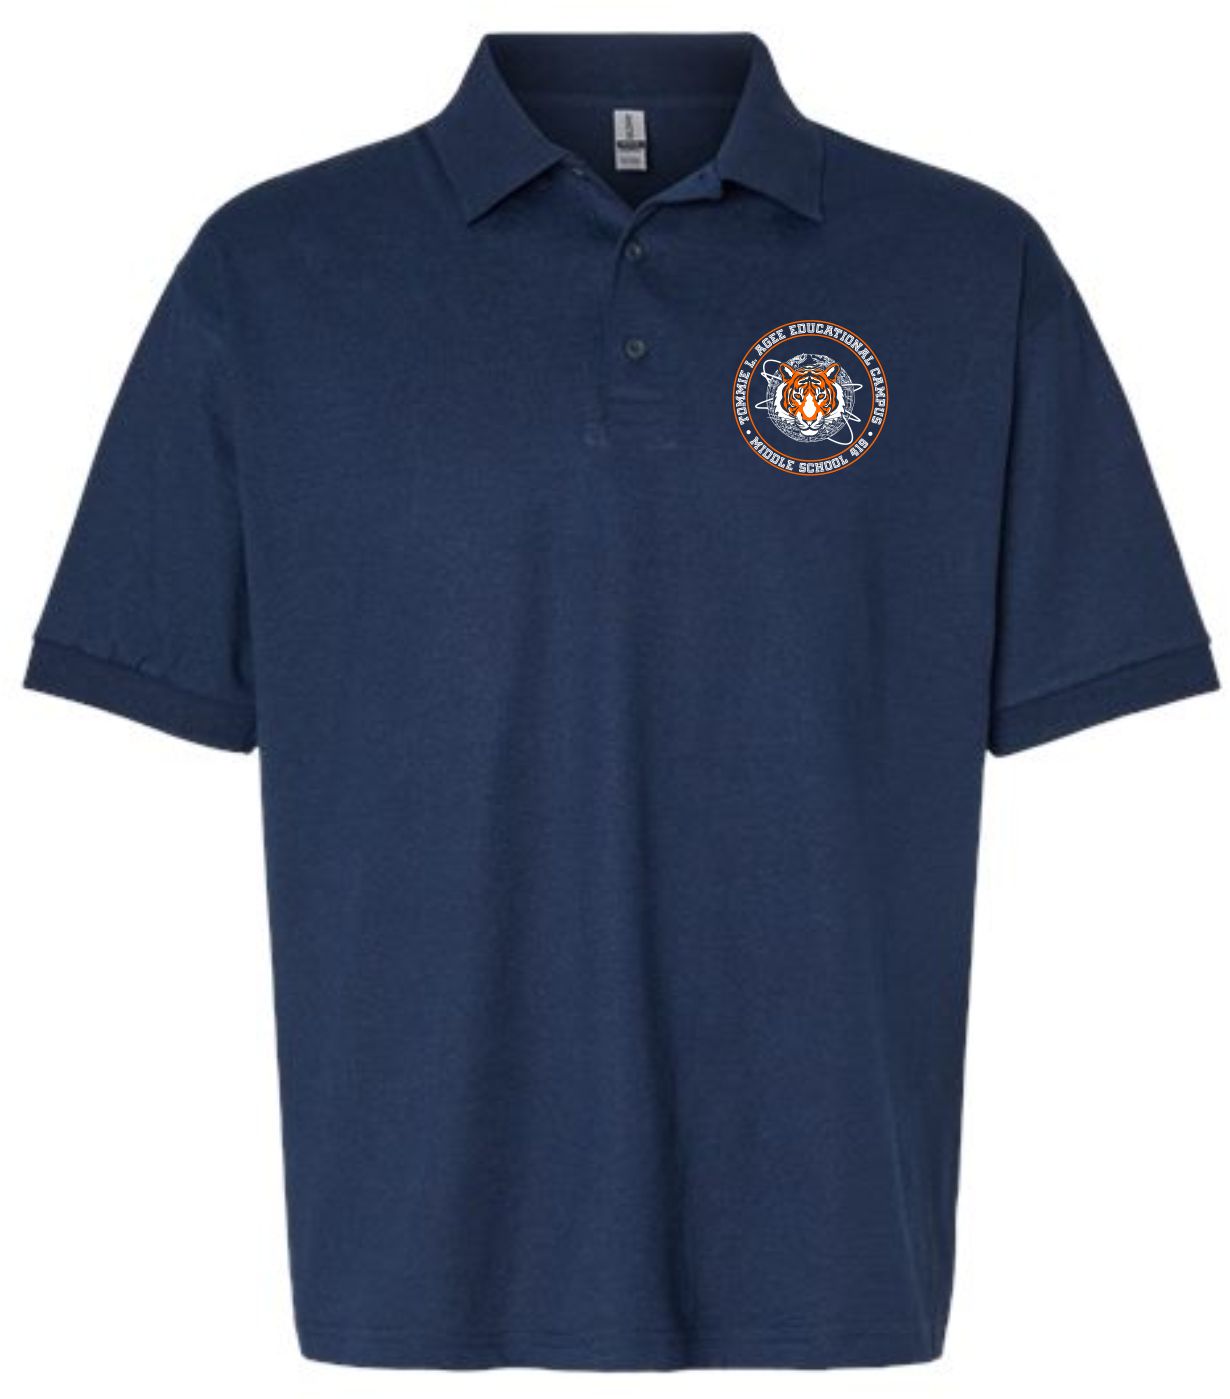 MS419-The Tommie L. Agee Ed. Campus Polo Shirt